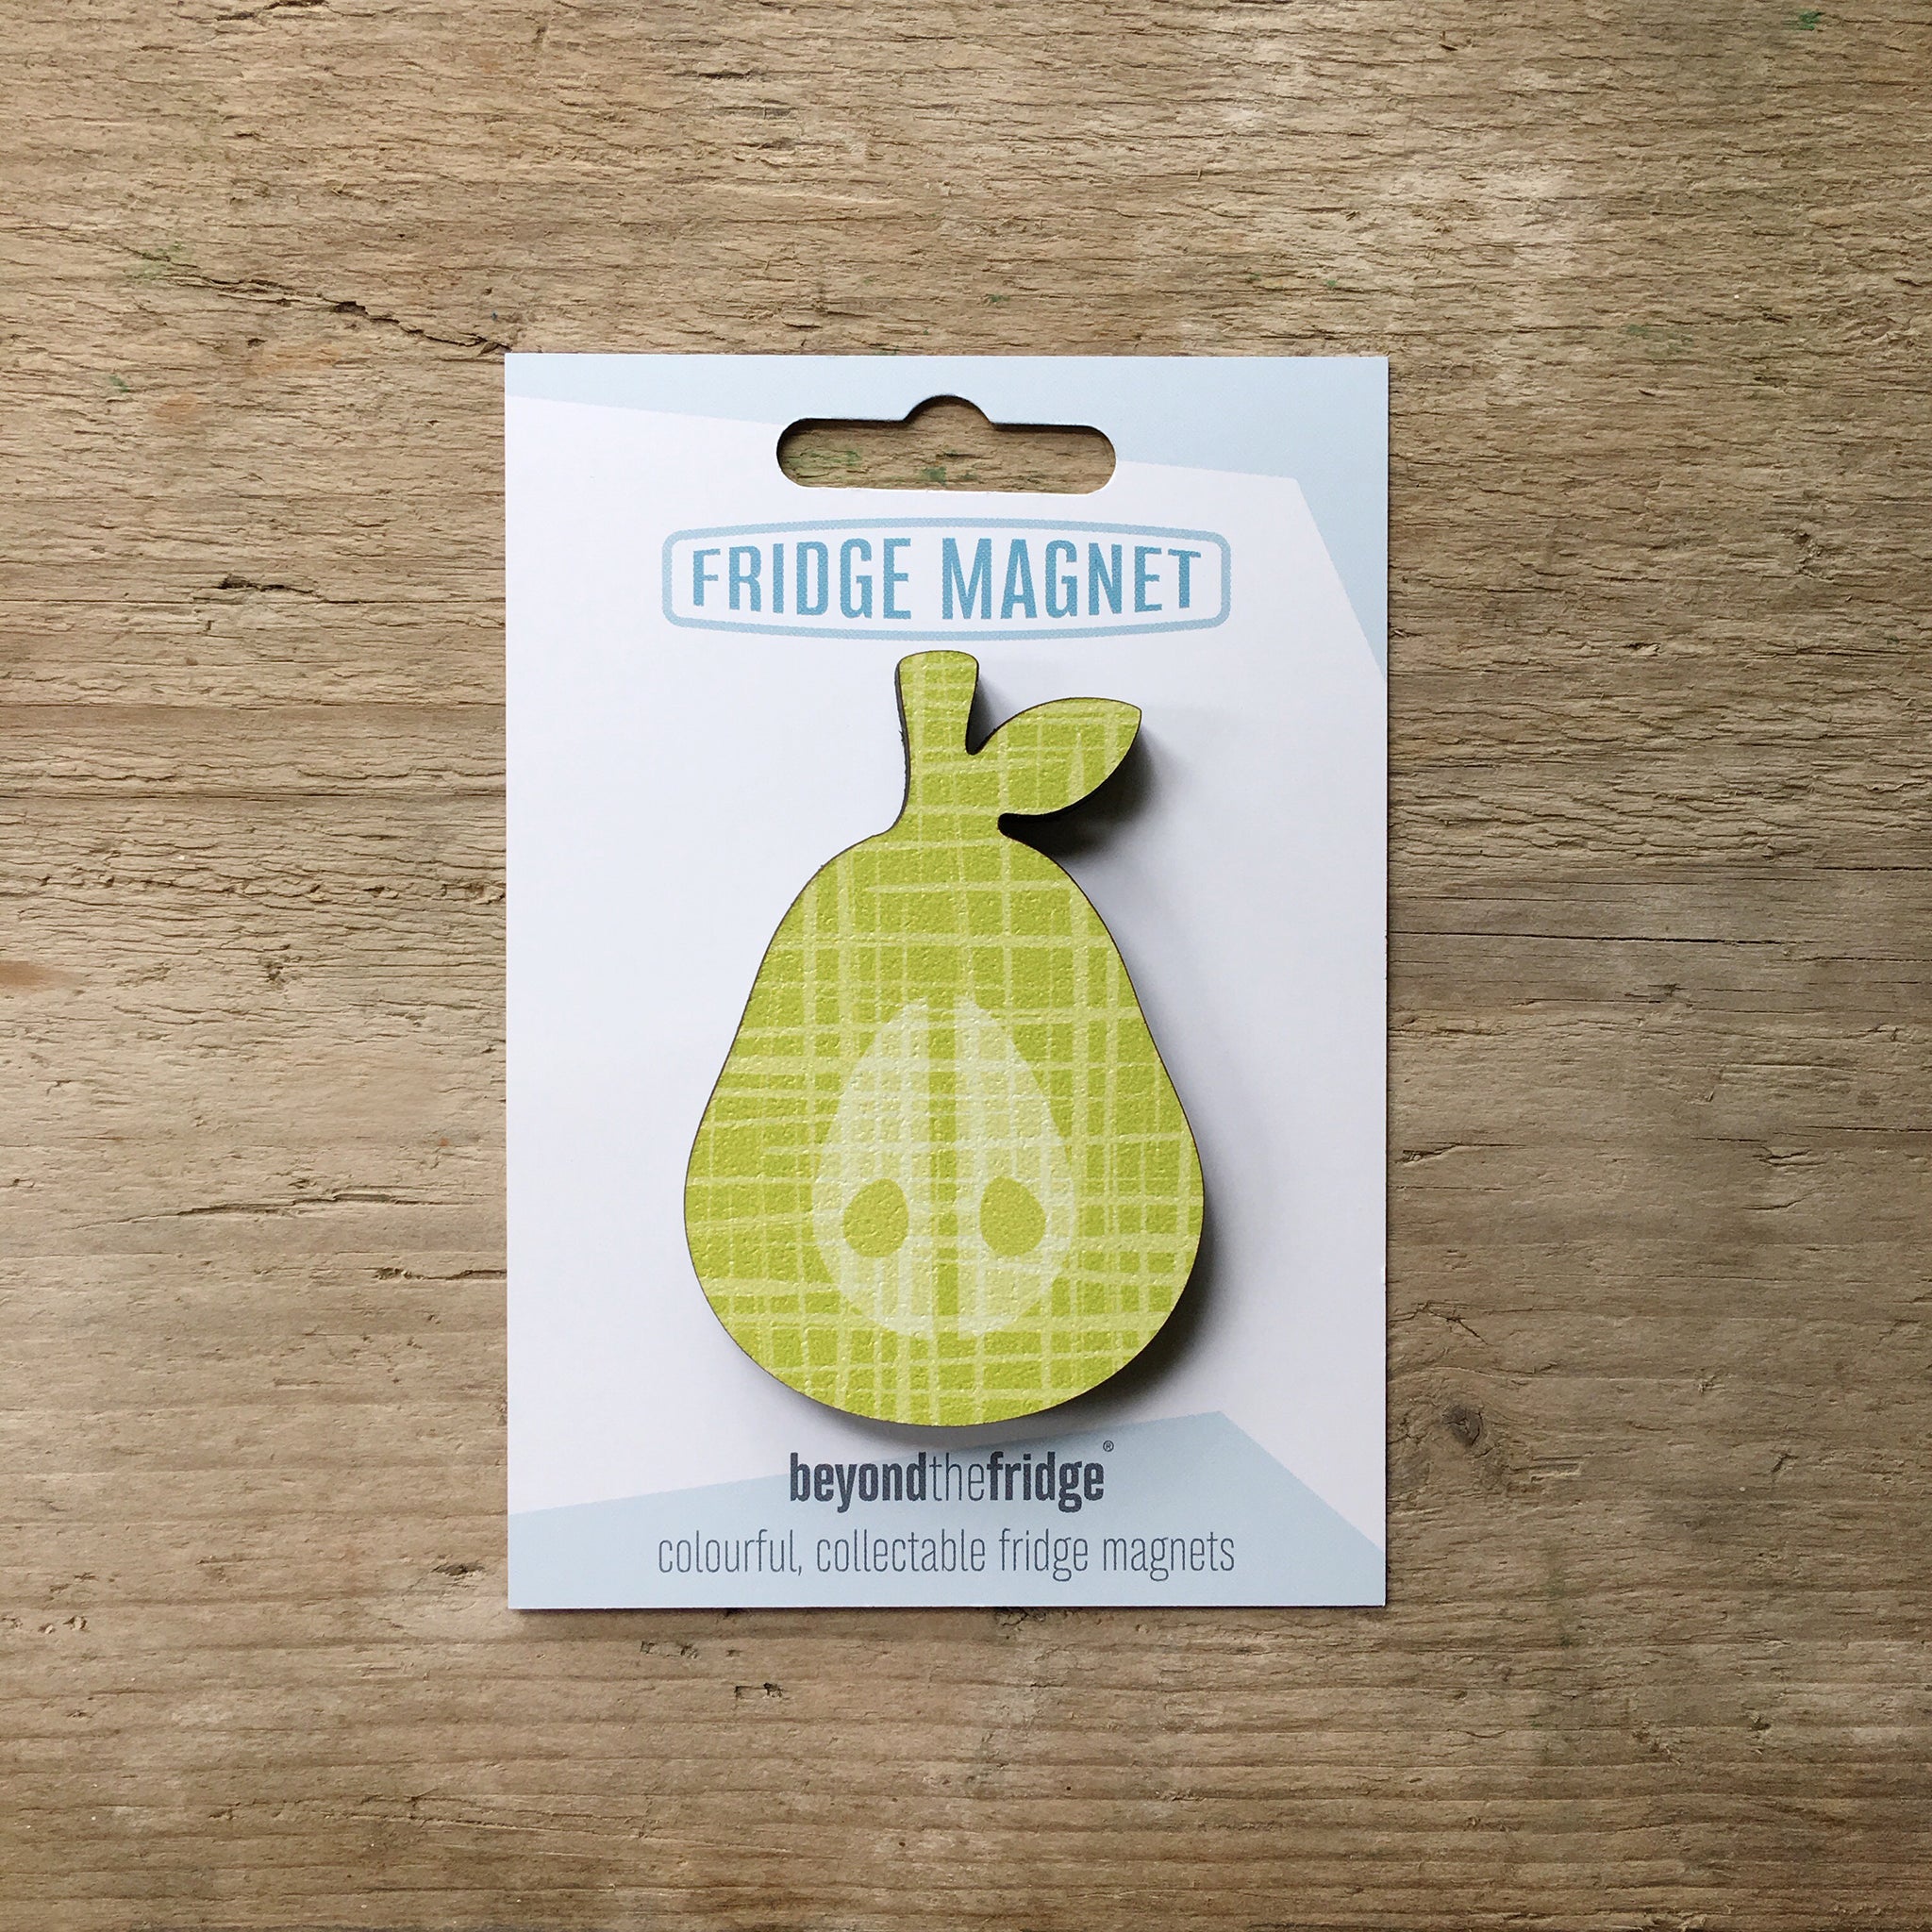 A green pear design plywood fridge magnet by Beyond the Fridge in it’s pack on a wooden background